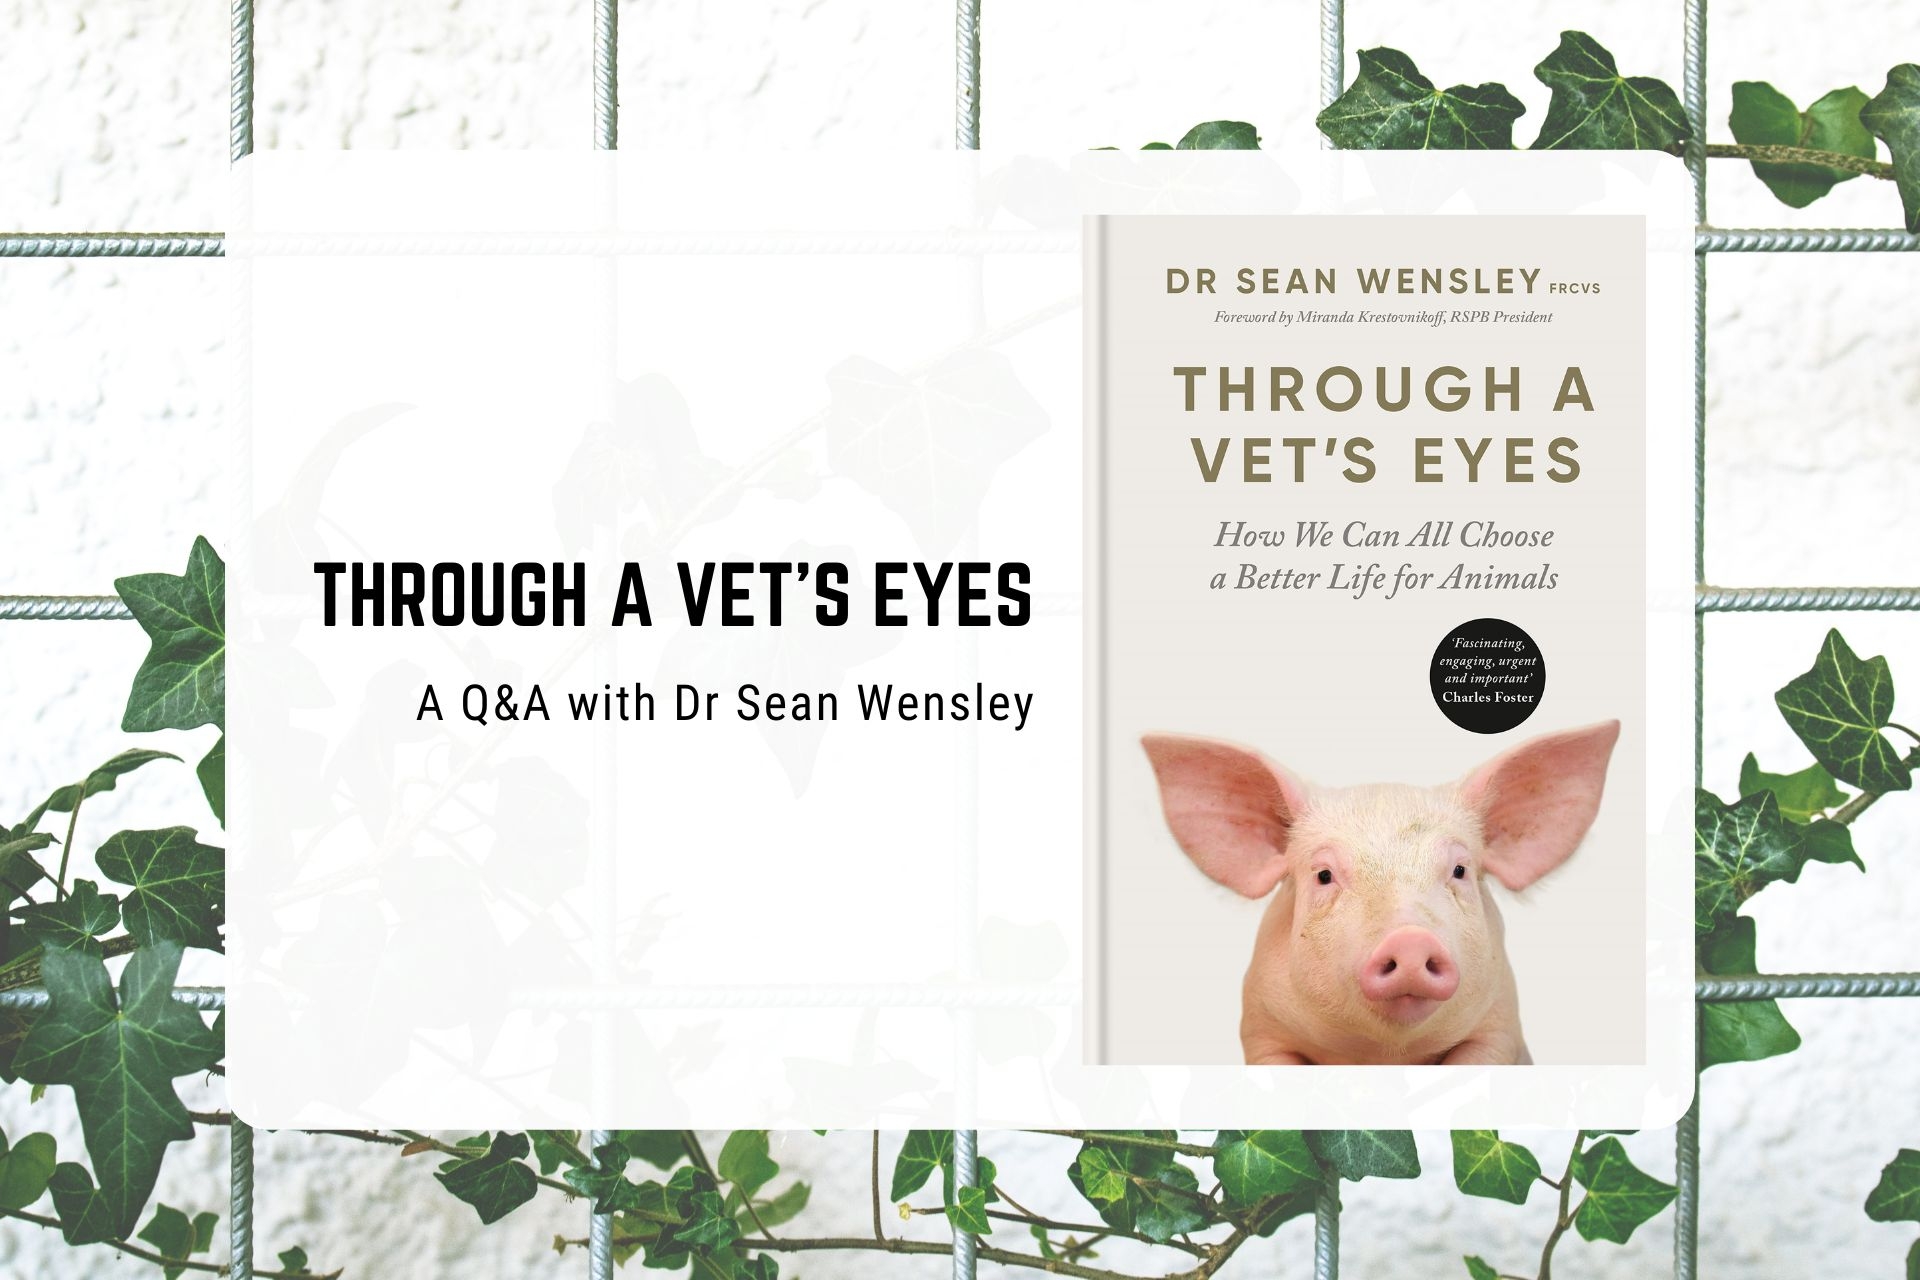 ﻿Through A Vet's Eyes﻿ - a Q&A with Dr Sean Wensley about his inspiring and compassionate memoir